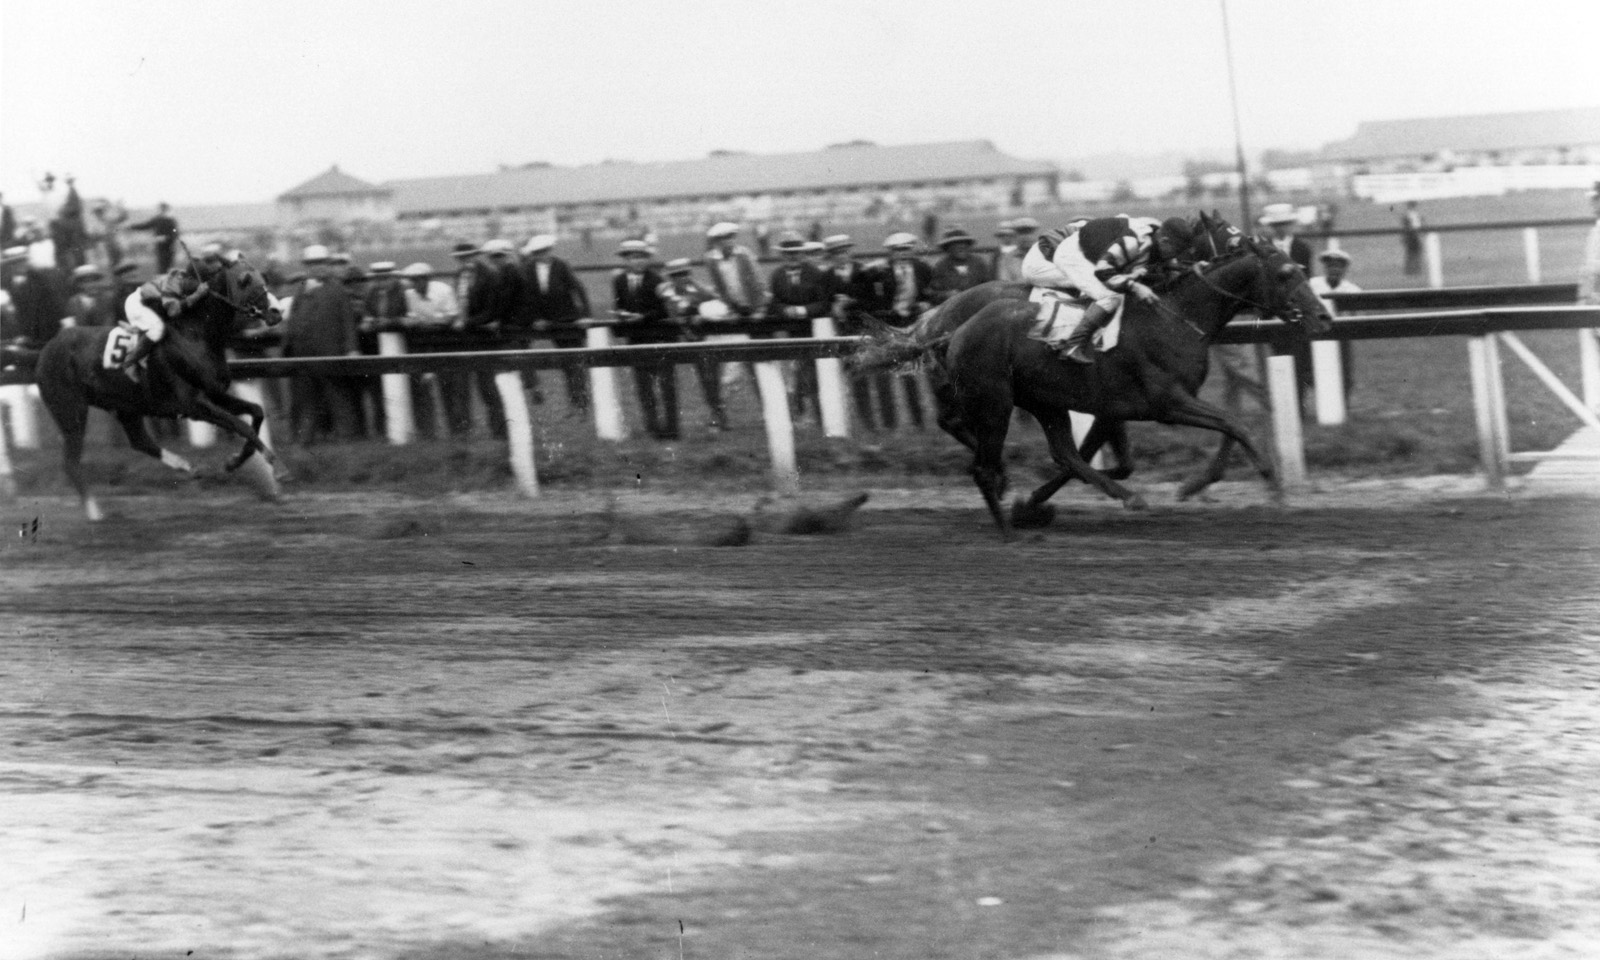 Crusader (Earl Sande up) winning the 1926 Dwyer Stakes at Aqueduct (Keeneland Library Cook Collection/Museum Collection)